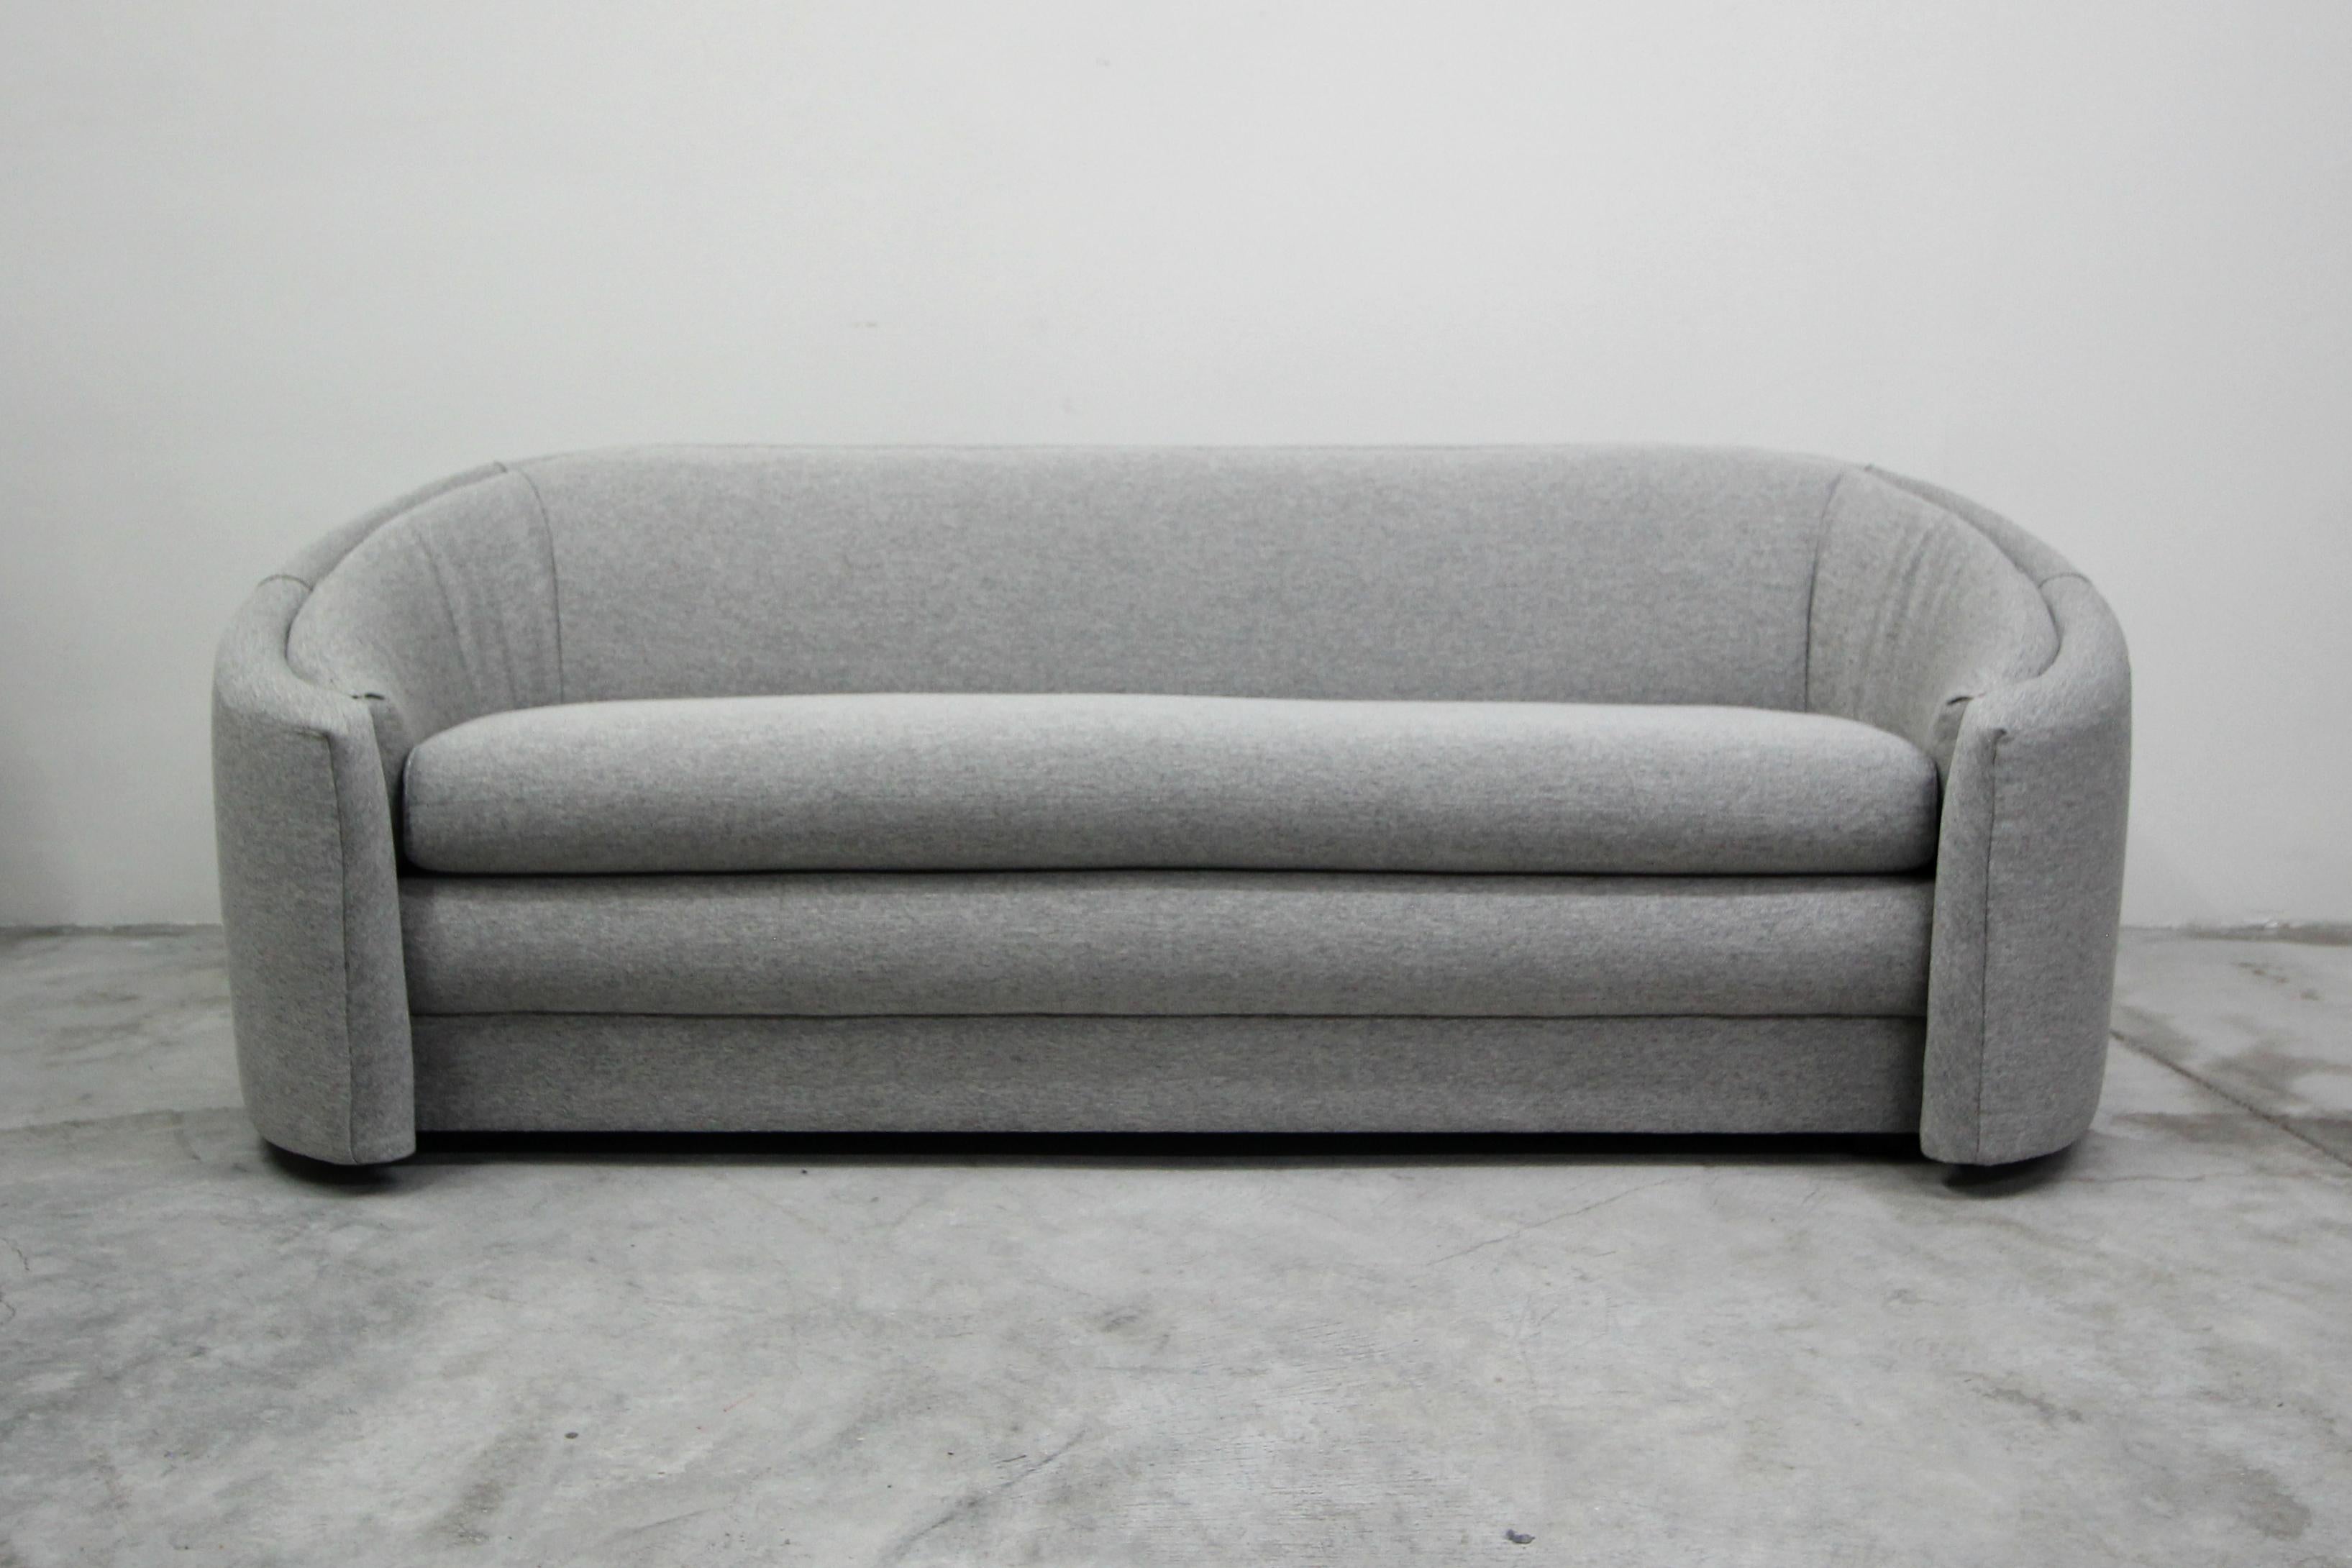 The perfect midcentury sofa with hints of Regency style swag. If you've been looking for that perfect sofa that can mesh into several styles this beauty will not disappoint. Her lines and curves give her mass appeal and her perfectly rounded